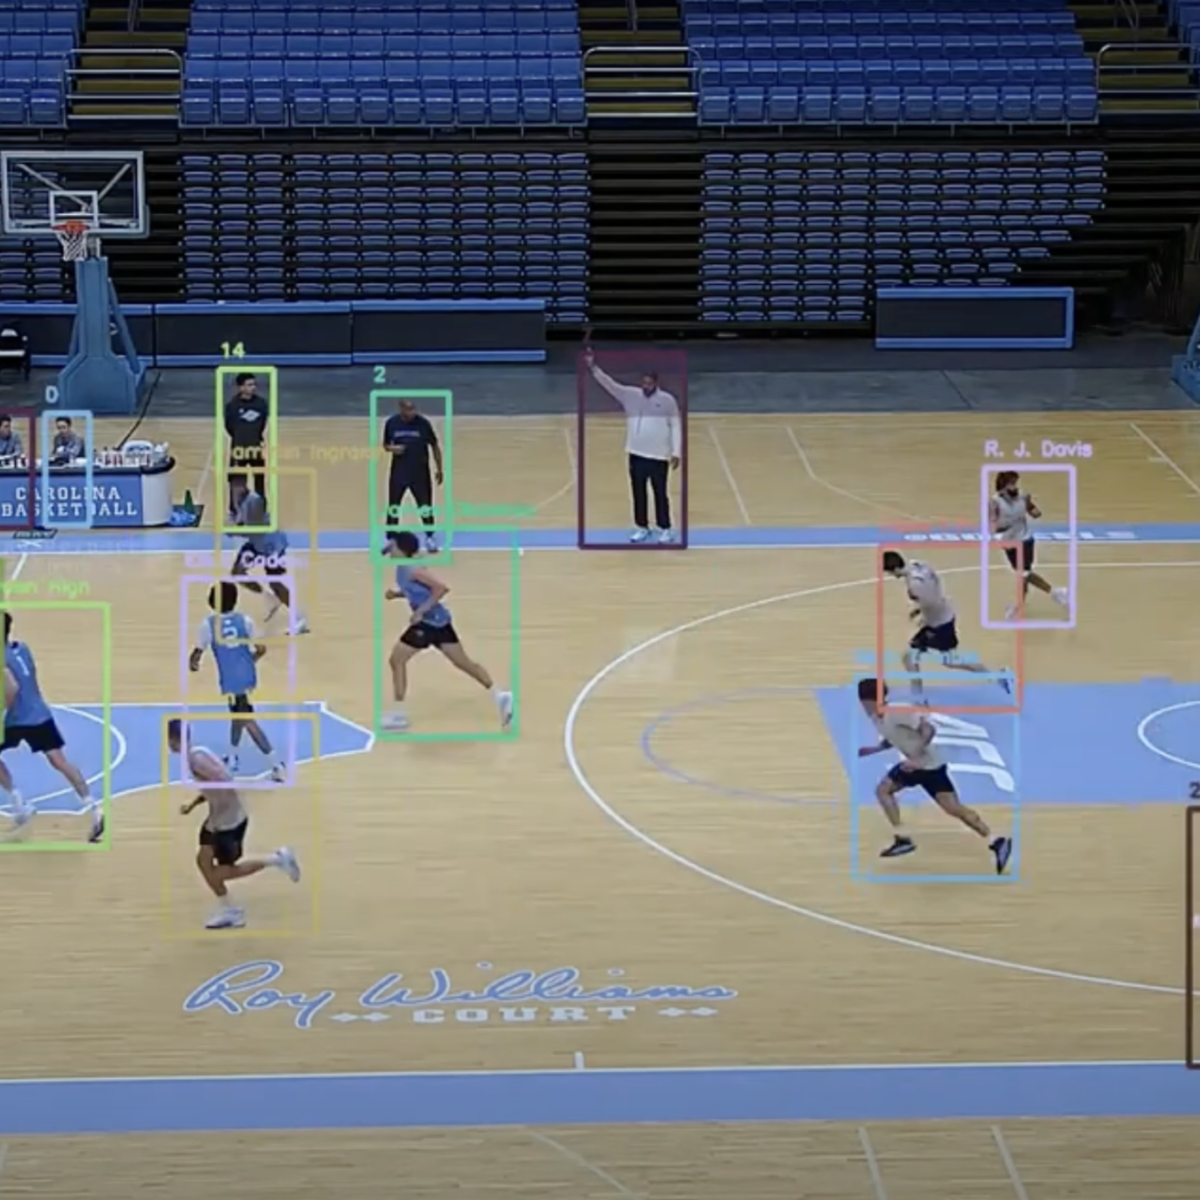 Sports video analysis software is used to track different basketball metrics.